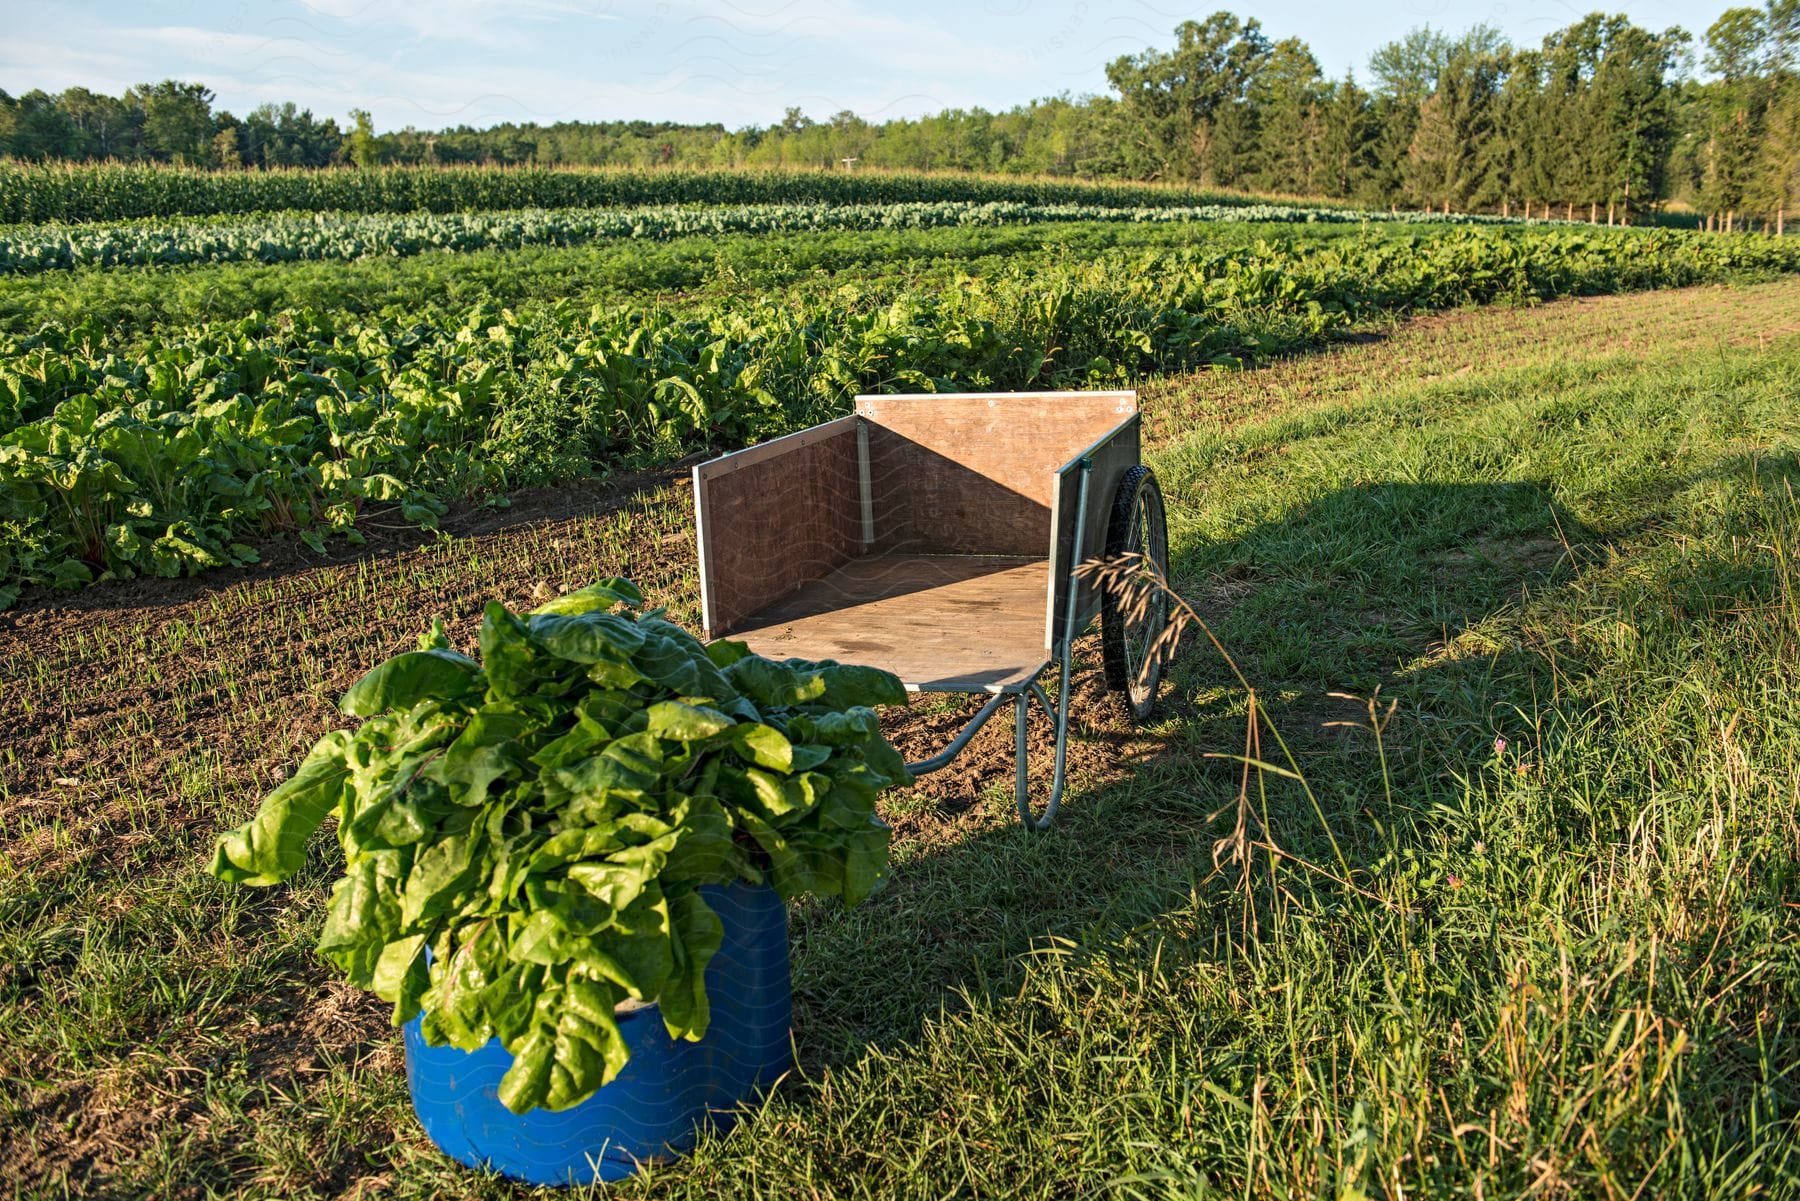 Empty cart next to barrel full of leafy vegetables next to rows of crops on essex farm essex ny